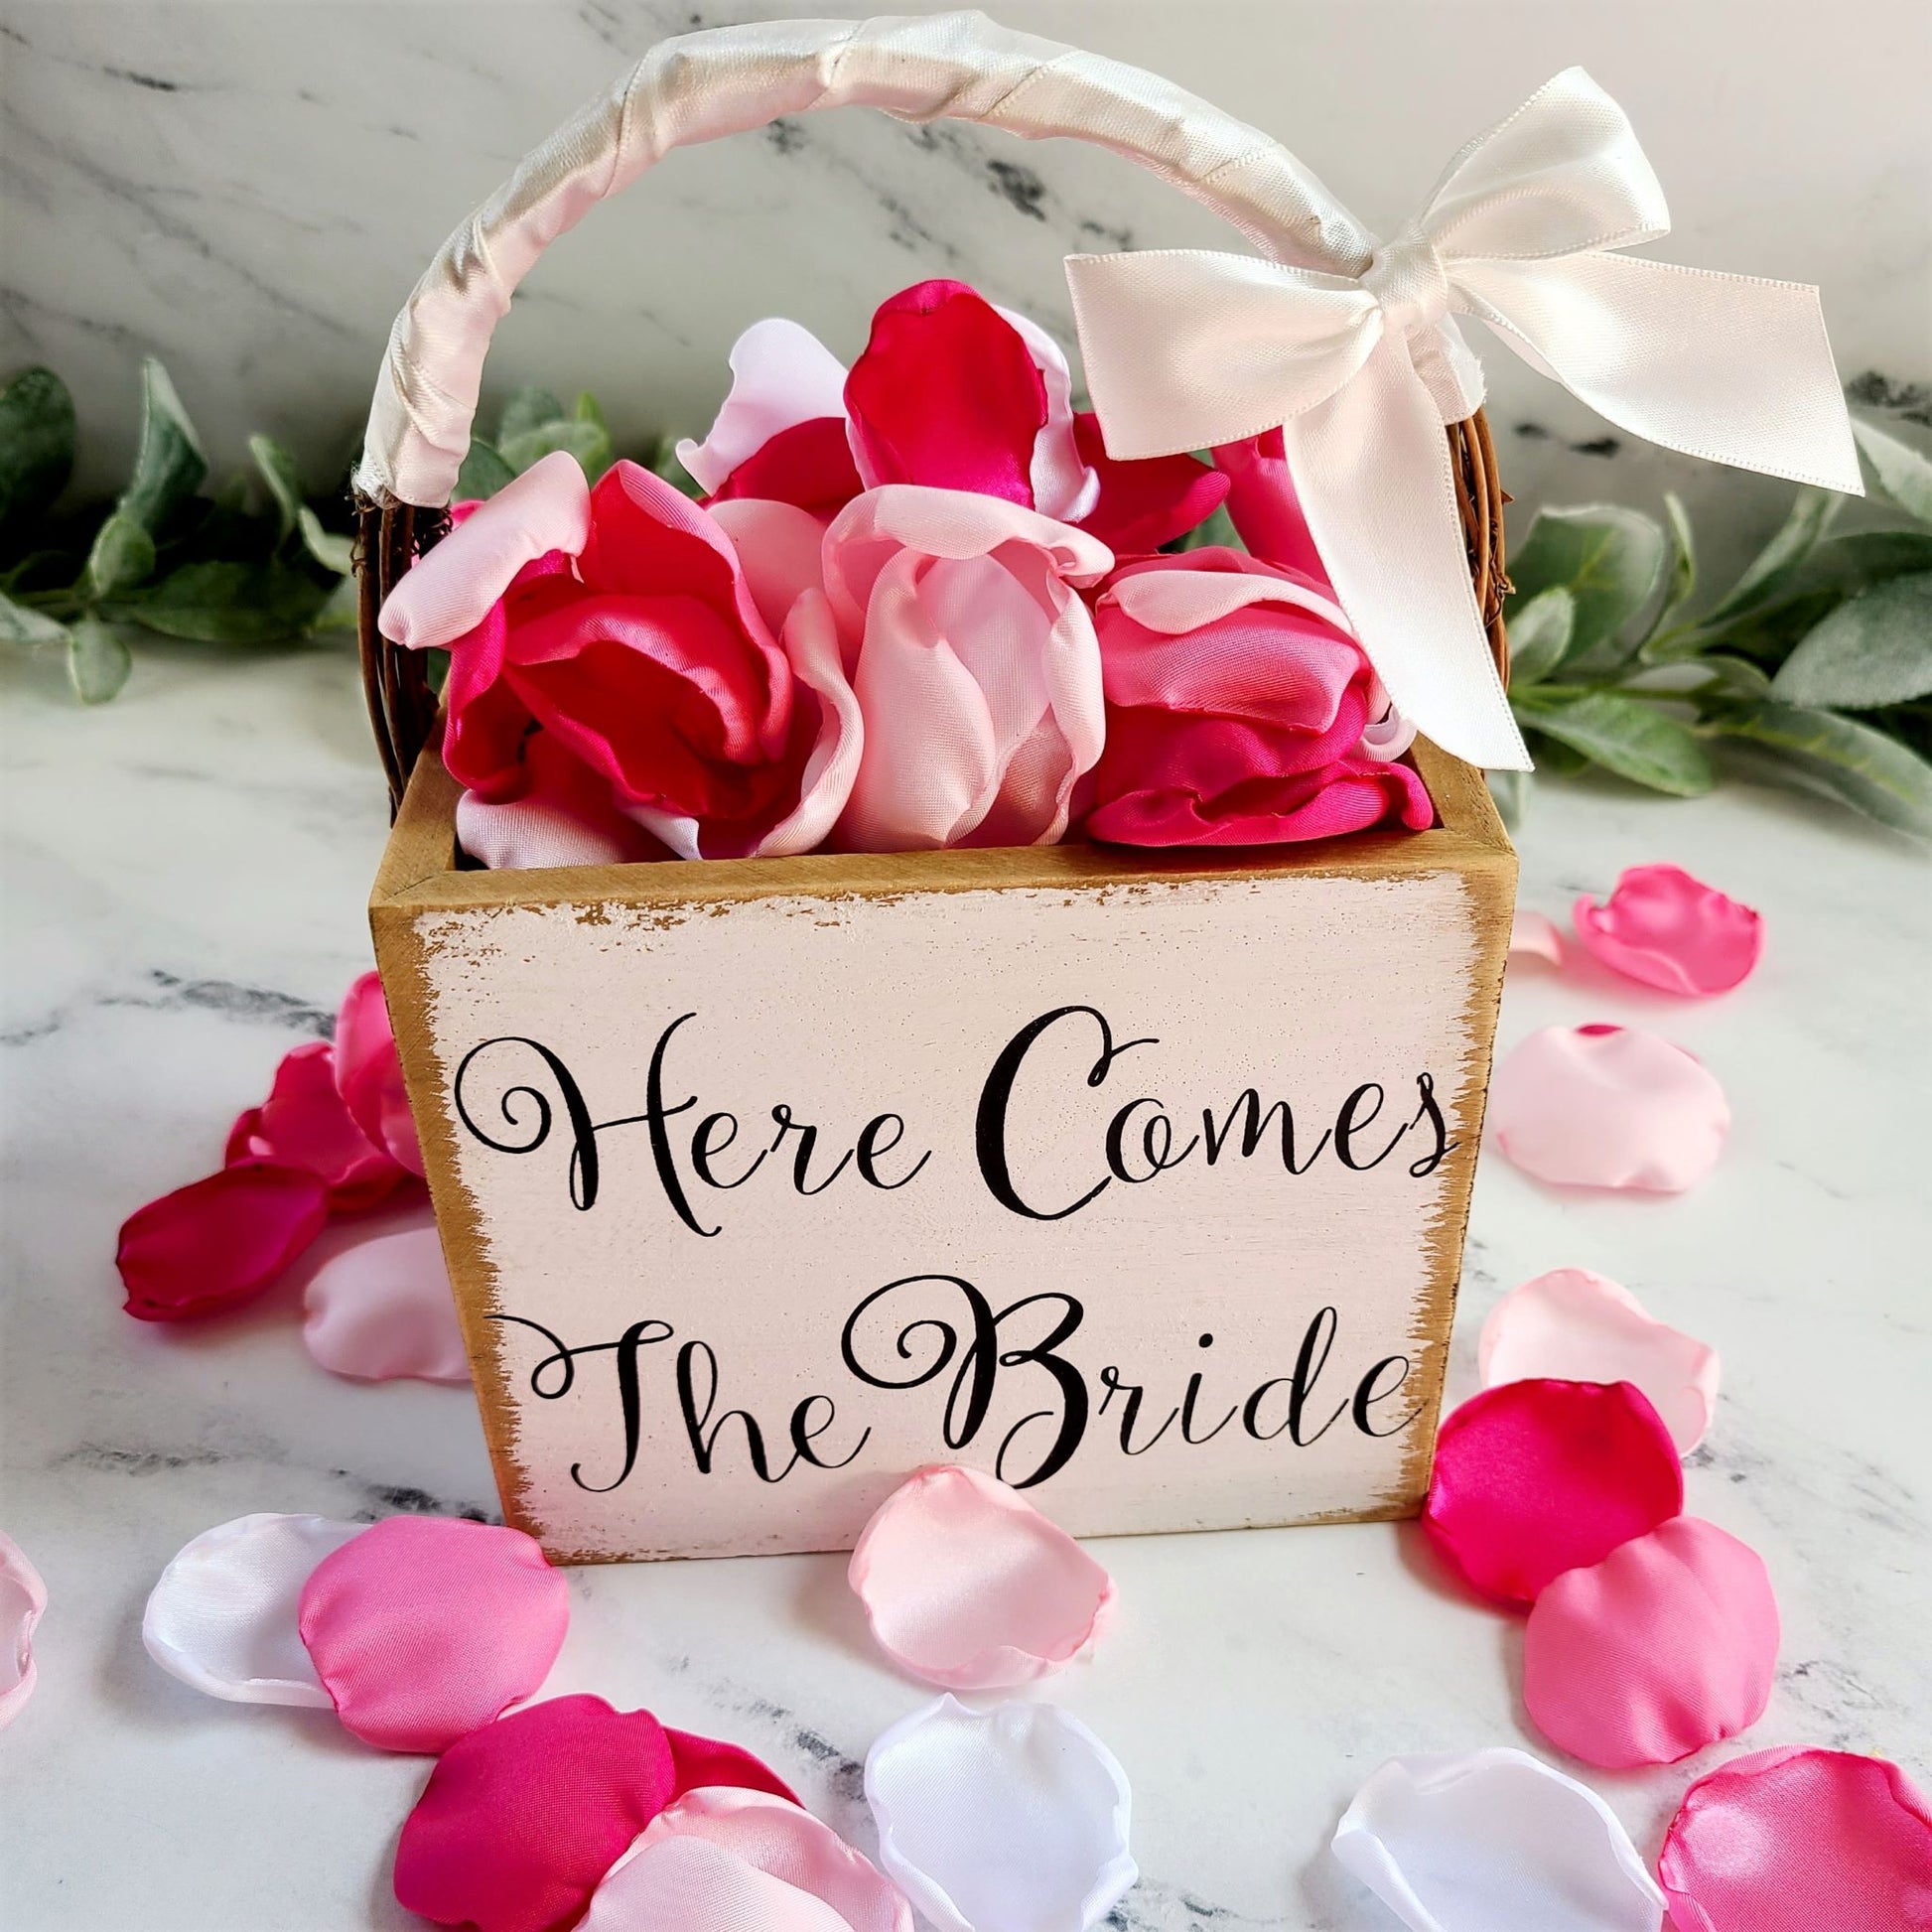 Here Comes the Bride flower girl basket with shades of Pink Rose Petals